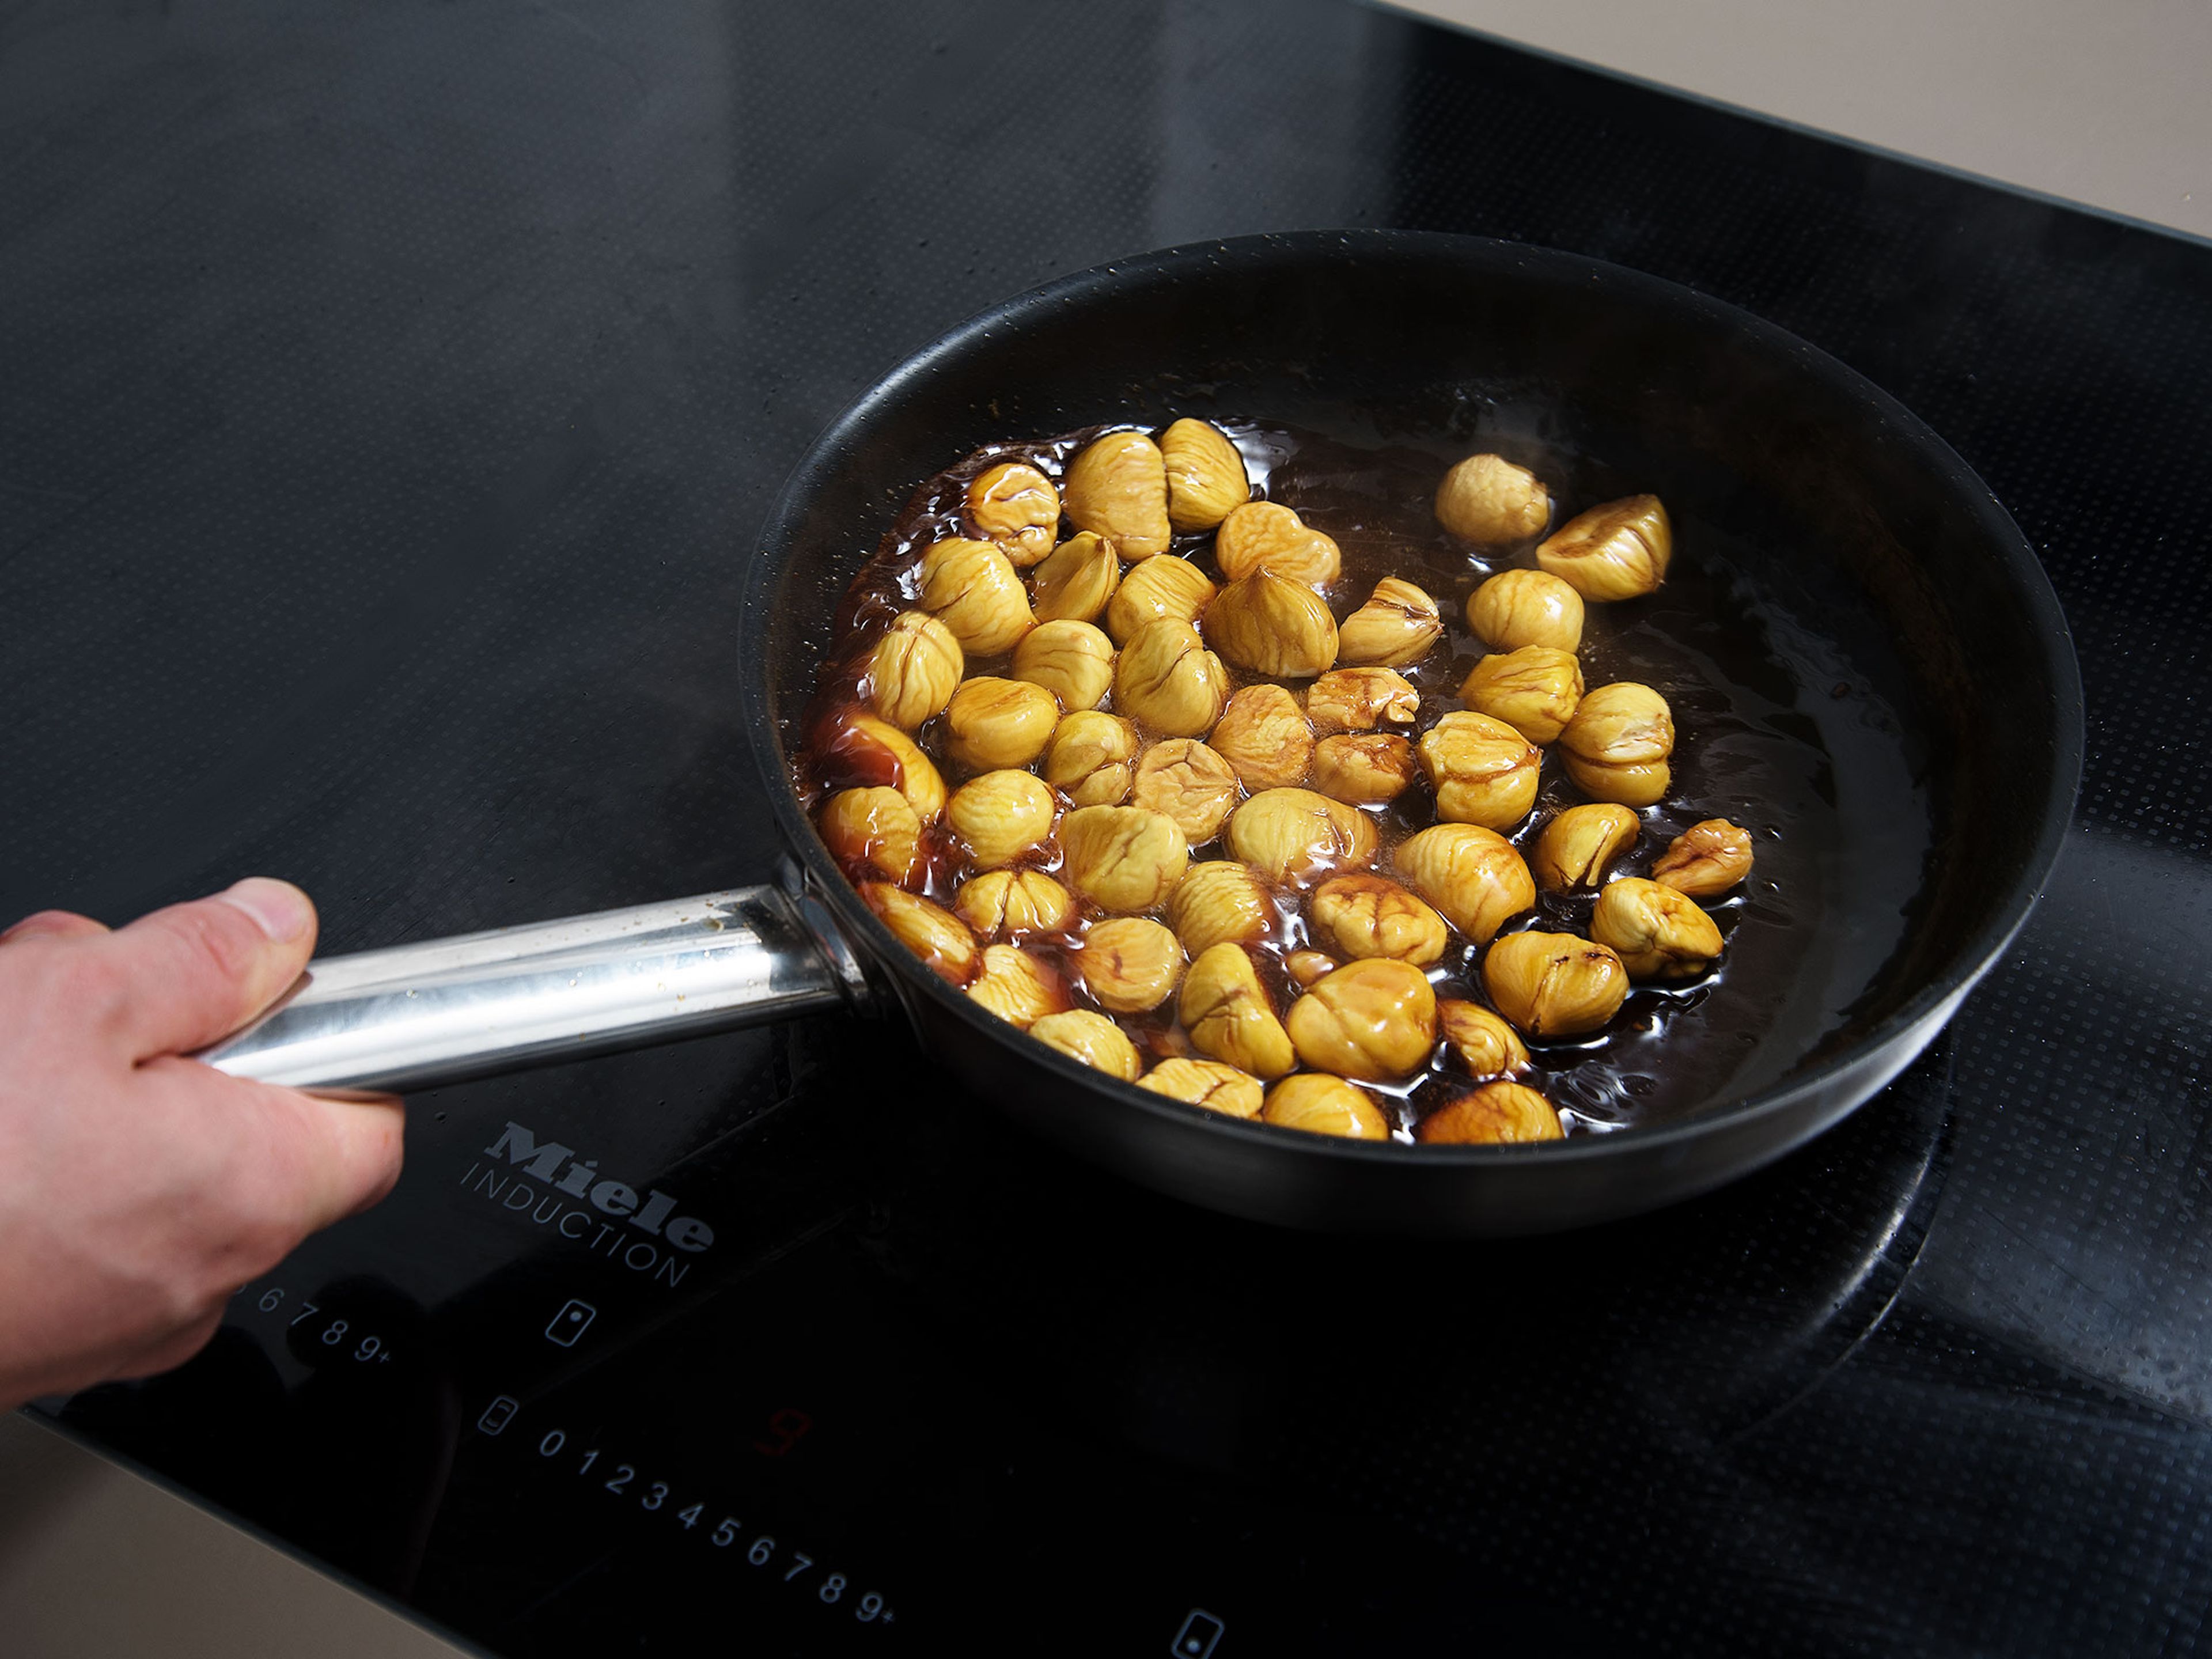 Add sugar to a pan over medium heat and caramelize, add water and bring to a boil. Add chestnuts and butter, reduce heat to low, making sure the caramel does not burn. Gently stir the pan to coat chestnuts with caramel and leave to simmer for approx. 2 min.